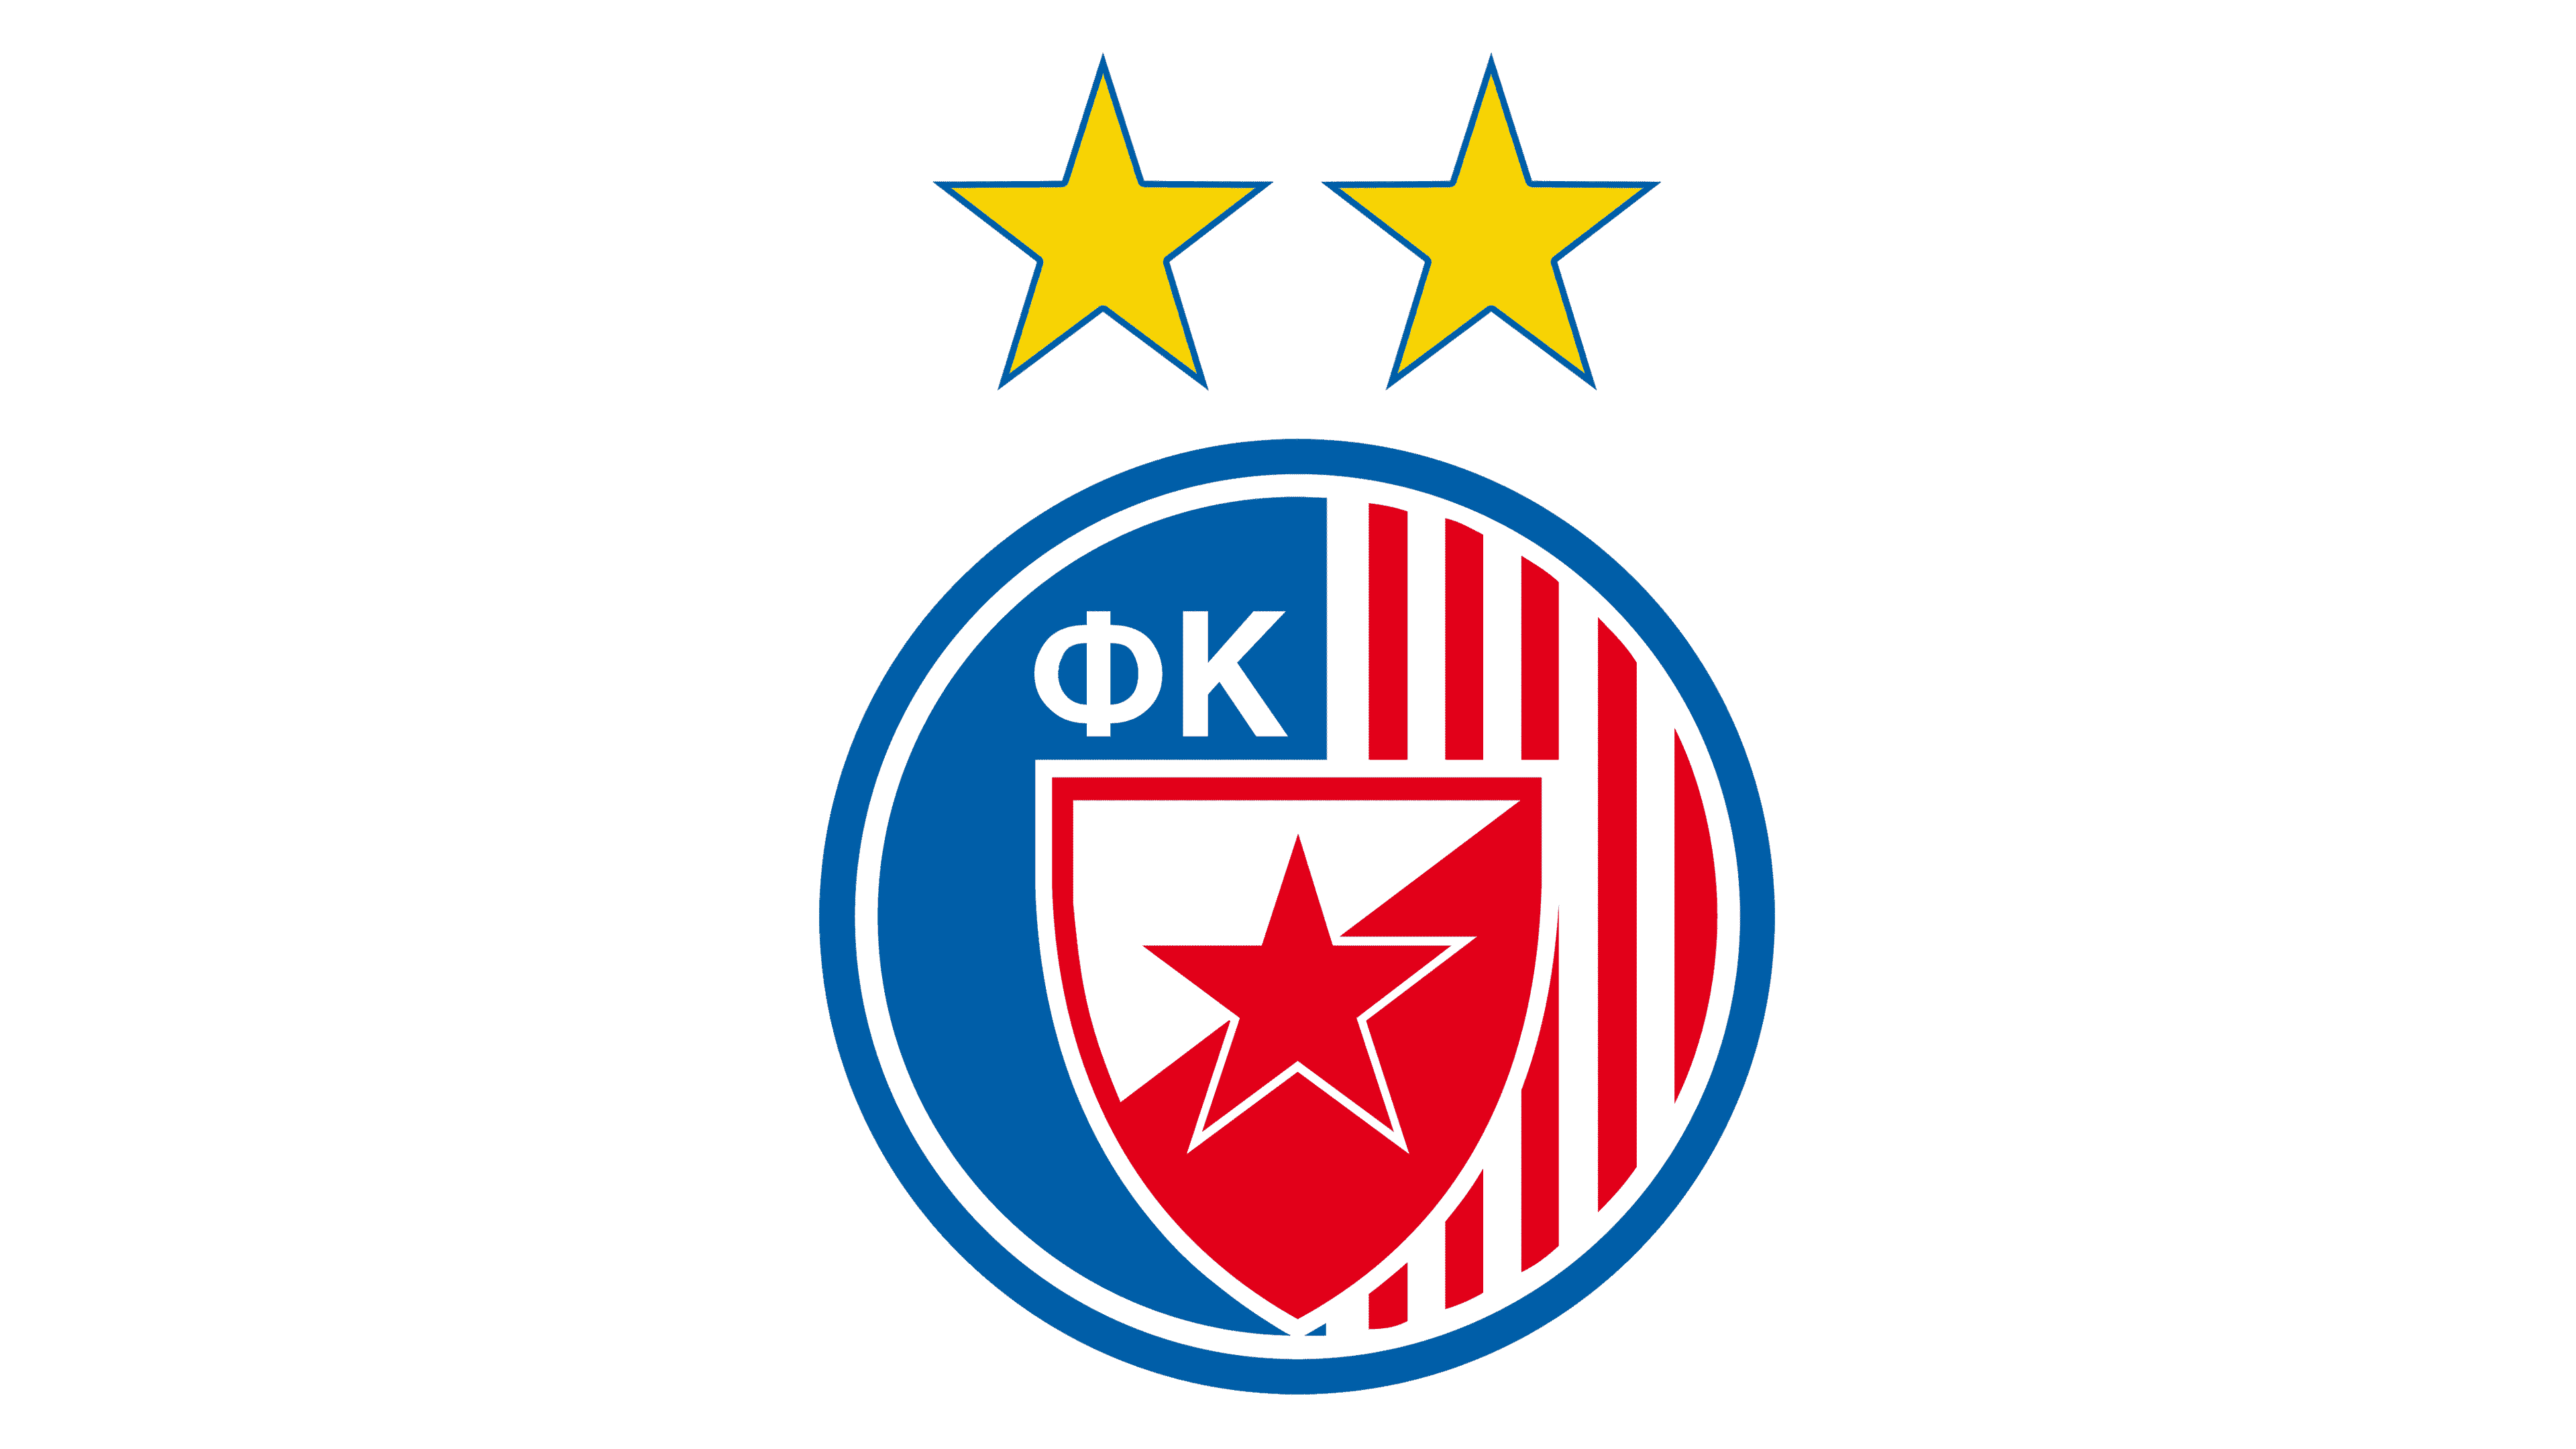 Fudbalski klub Crvena zvezda Pinned Flag from Corners, Isolated with  Different Waving Variations, 3D Rendering 24798228 PNG